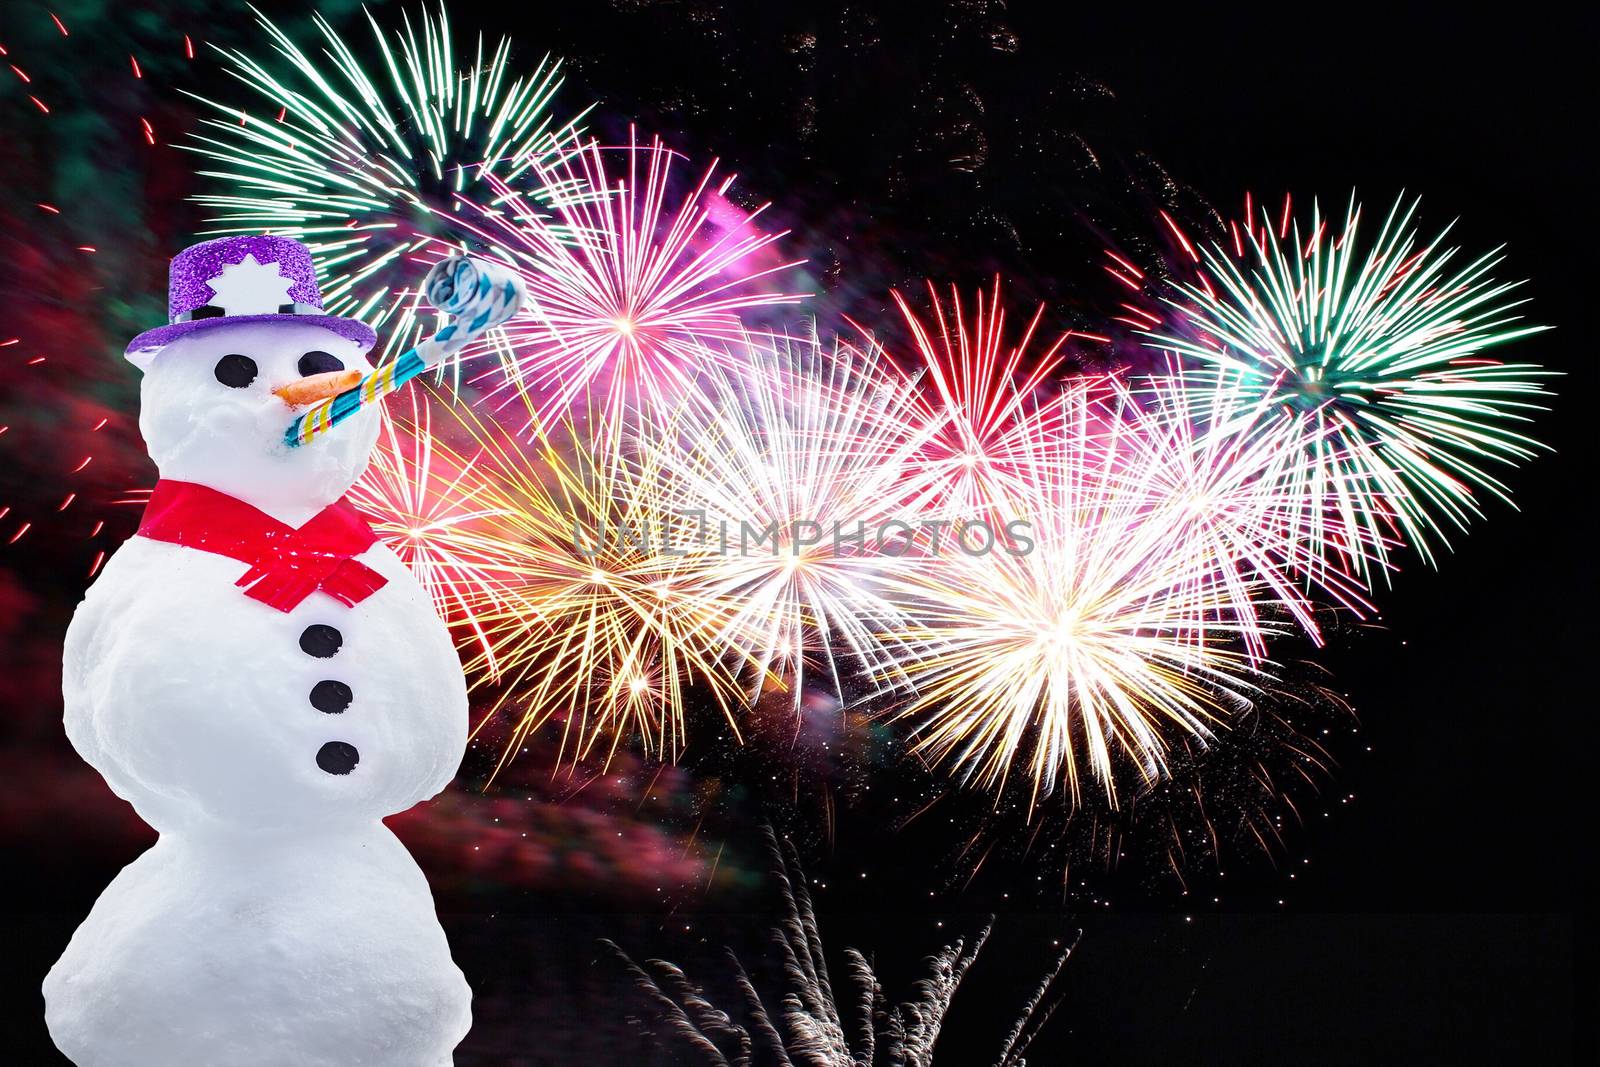 Happy new year a funny party snowman isolated on a black background with colorful fireworks by charlottebleijenberg